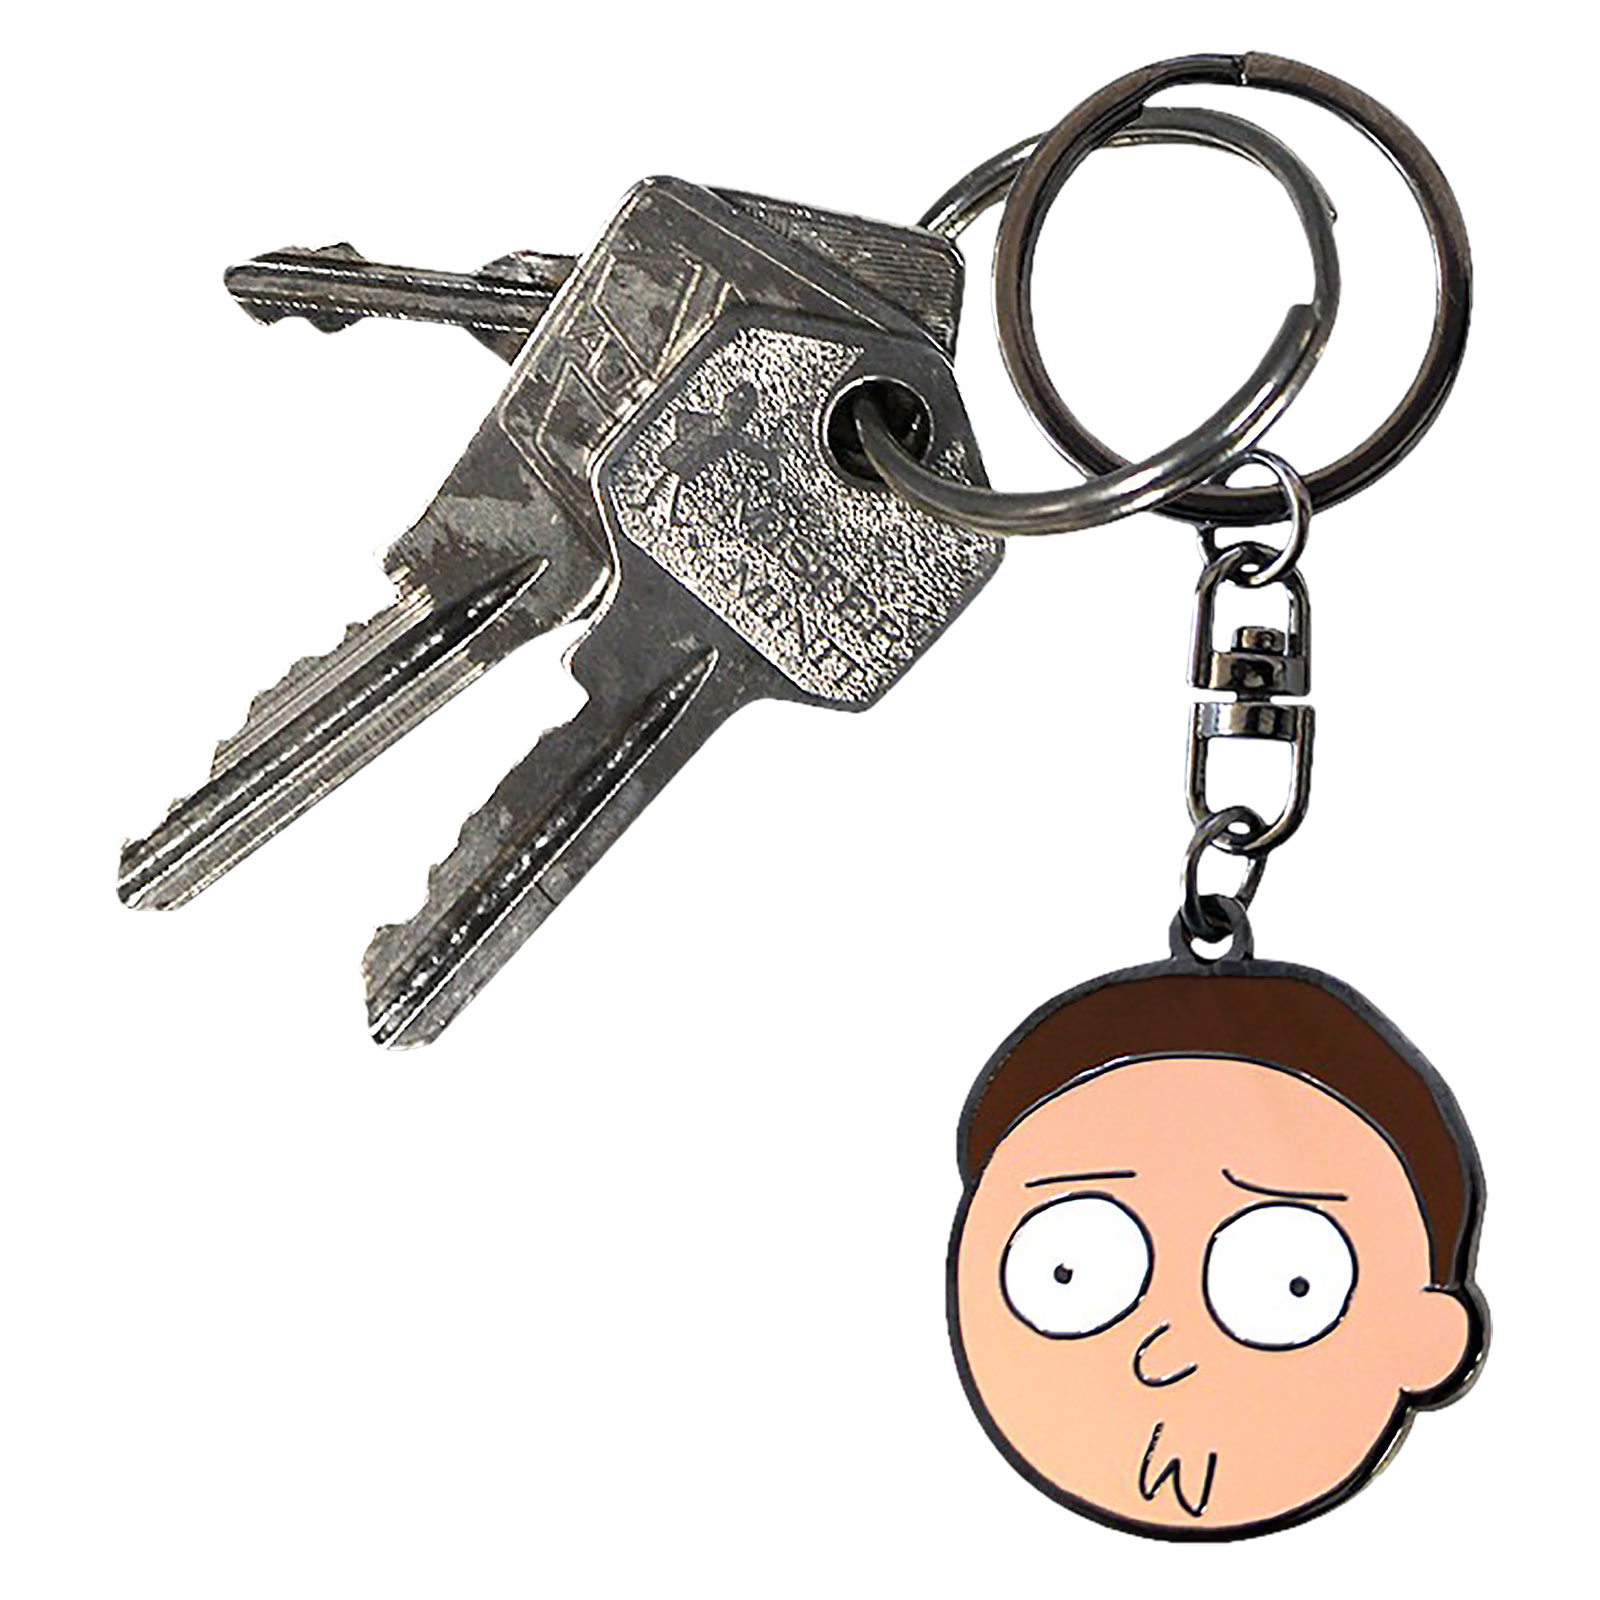 Rick and Morty - Morty Face Keychain